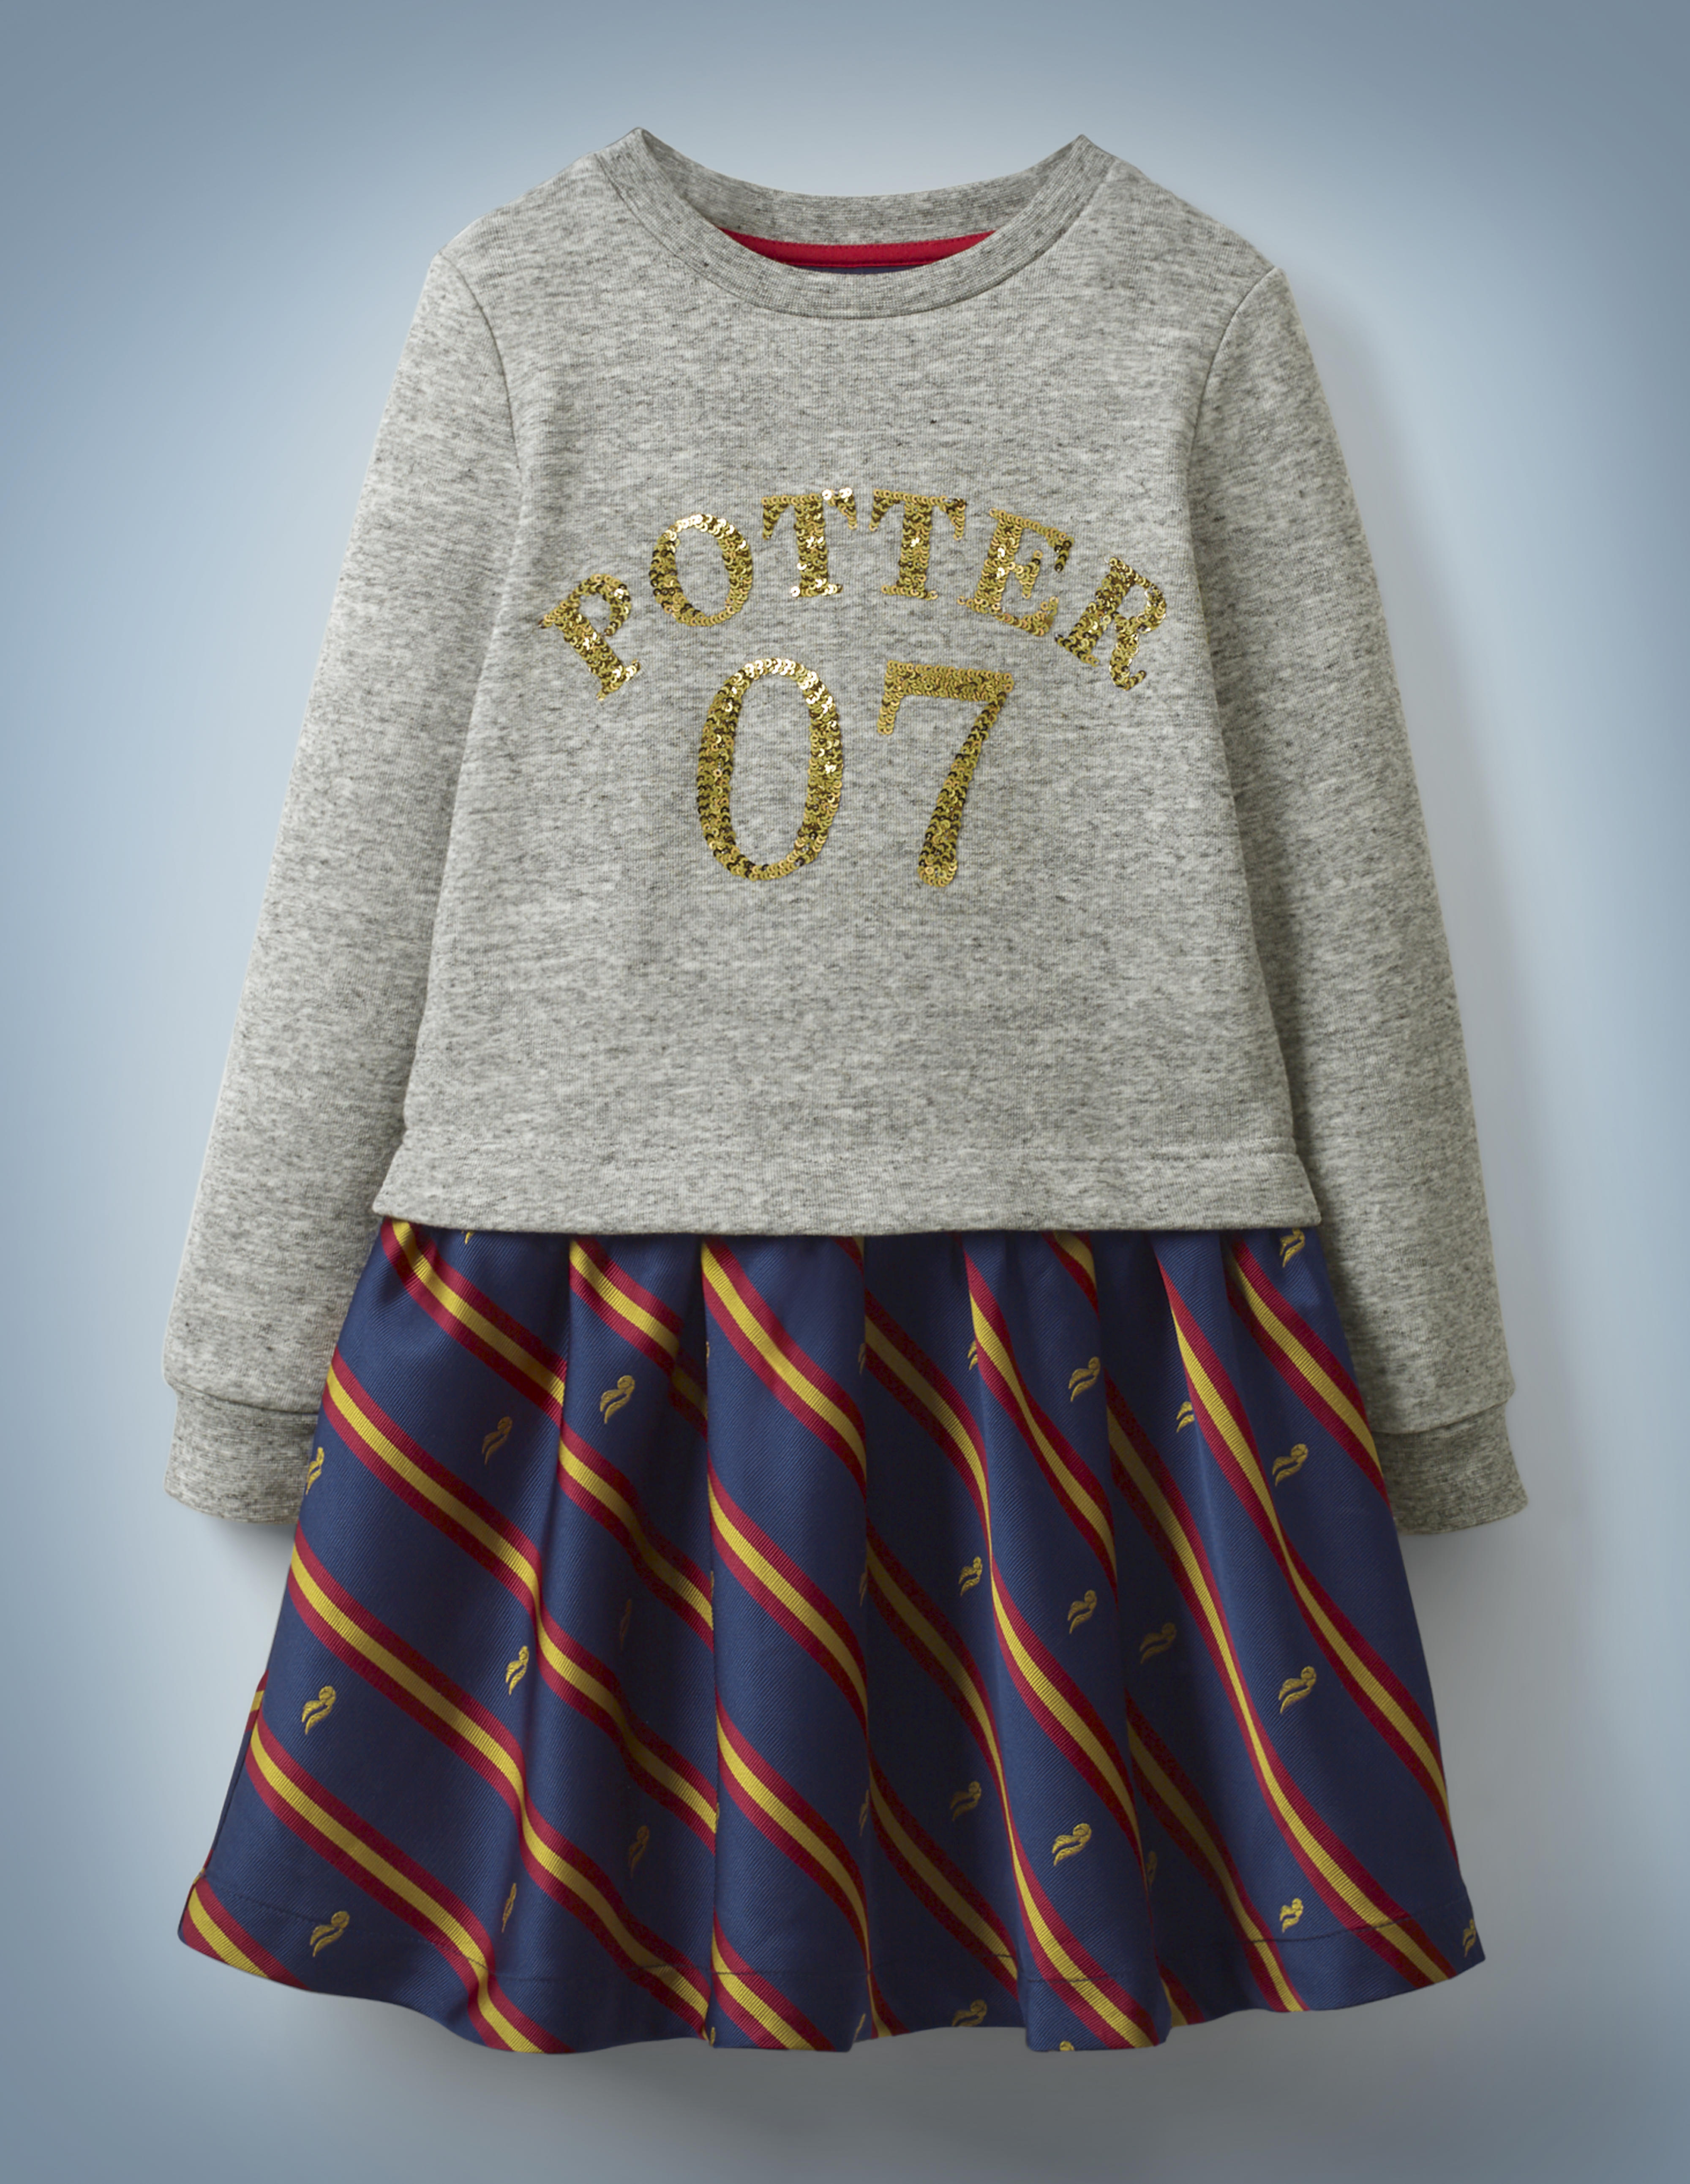 The Mini Boden Sequin Seeker Dress resembles a skirt and top and features a heather gray, long-sleeved top with gold sequins reading “Potter 07” and blue skirt bottom with red-and-gold stripes and Golden Snitches. It retails at £35.